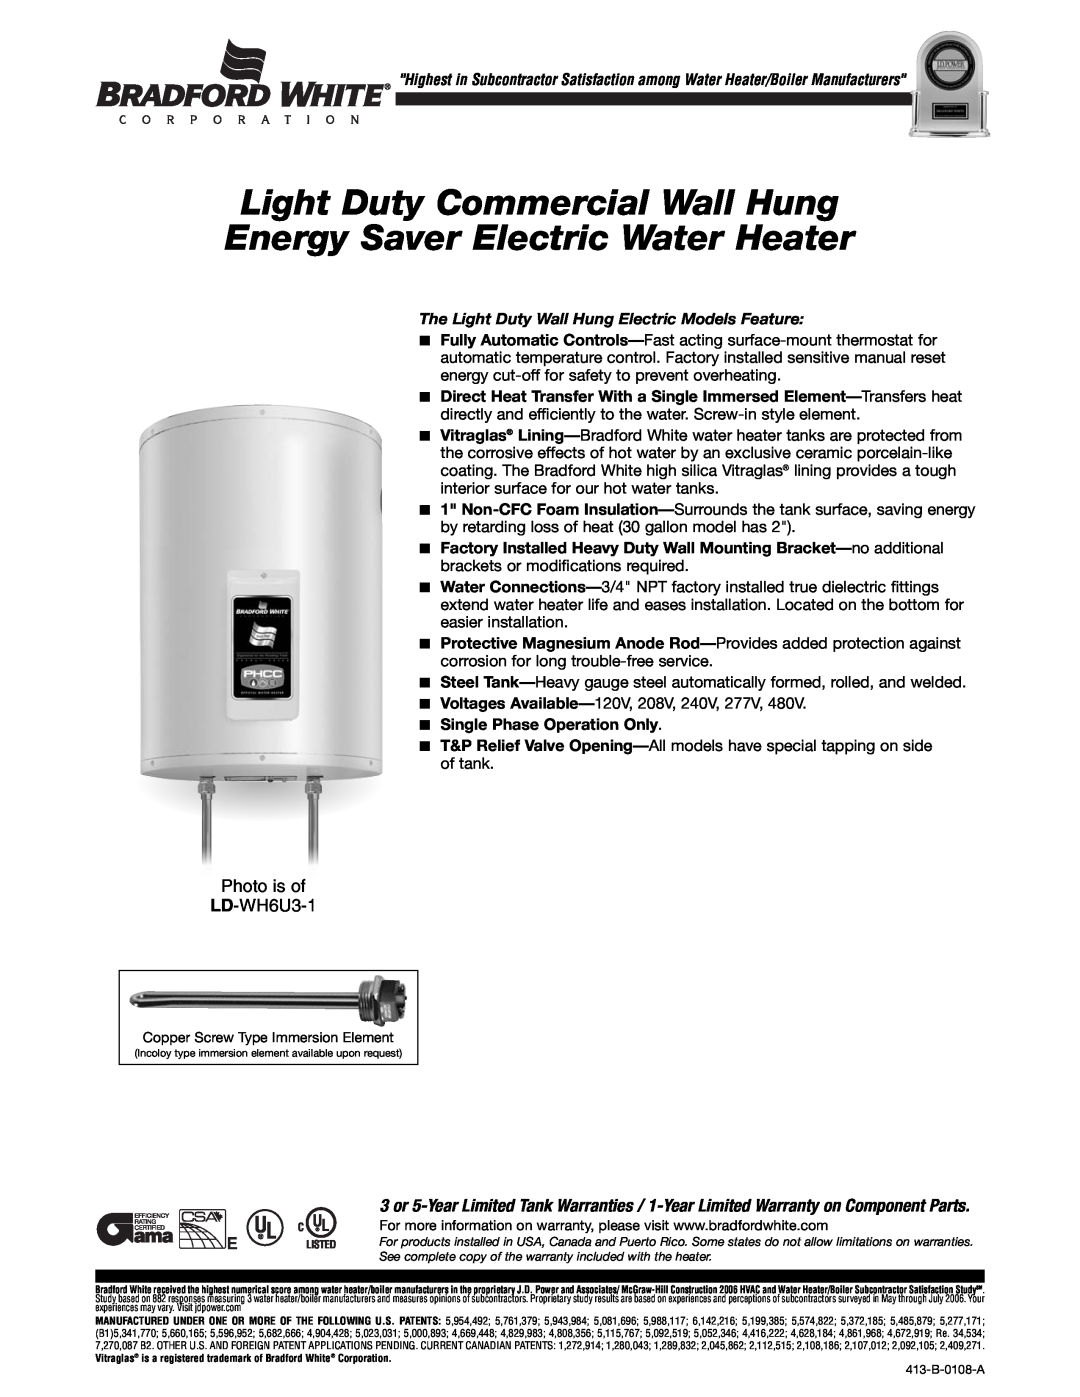 Bradford-White Corp LD-WH6U3-1 warranty Light Duty Commercial Wall Hung Energy Saver Electric Water Heater 